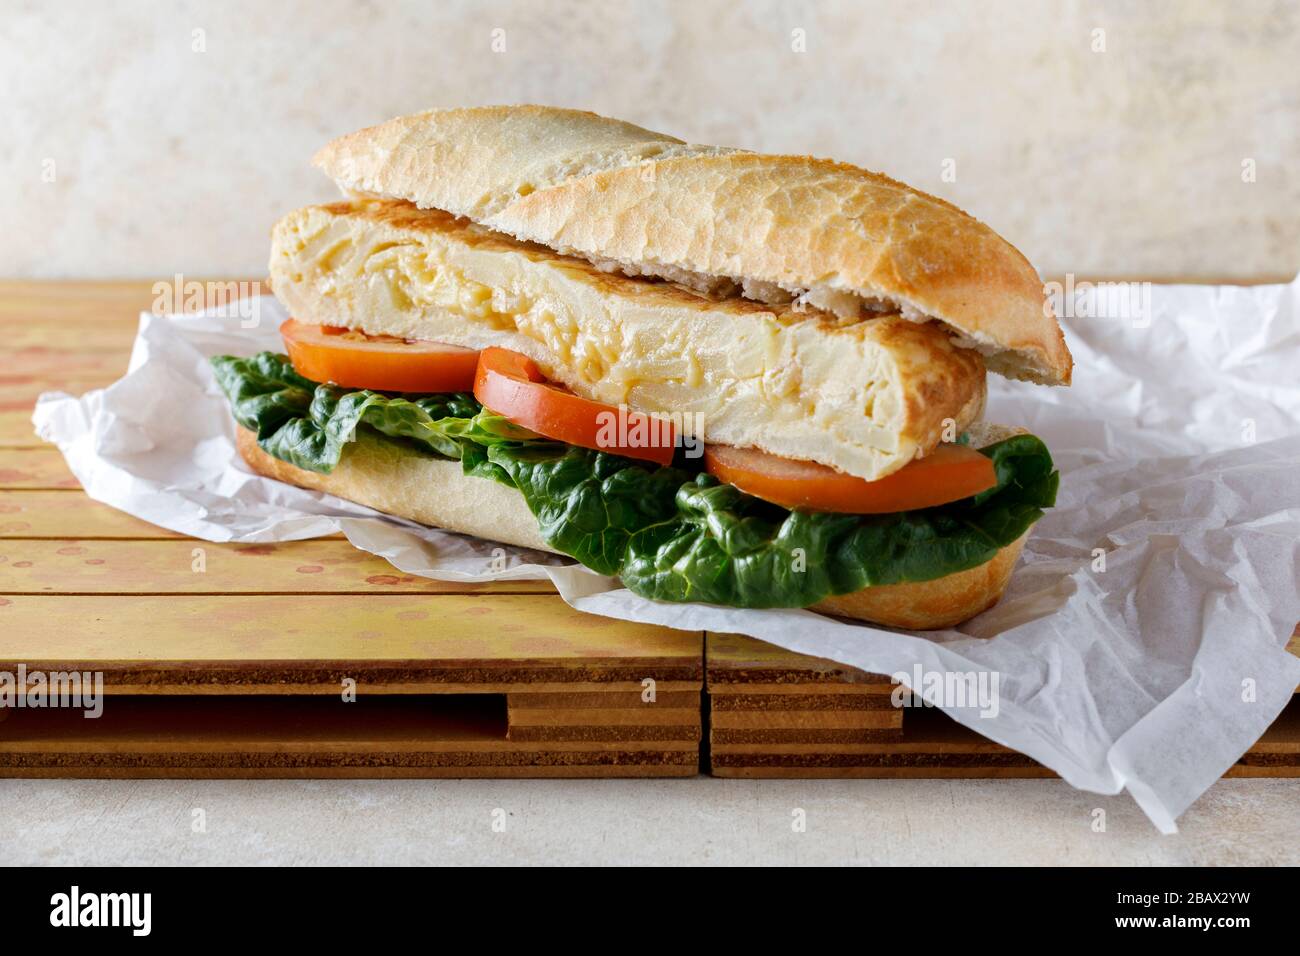 Omelette sandwich with lettuce and tomato Stock Photo